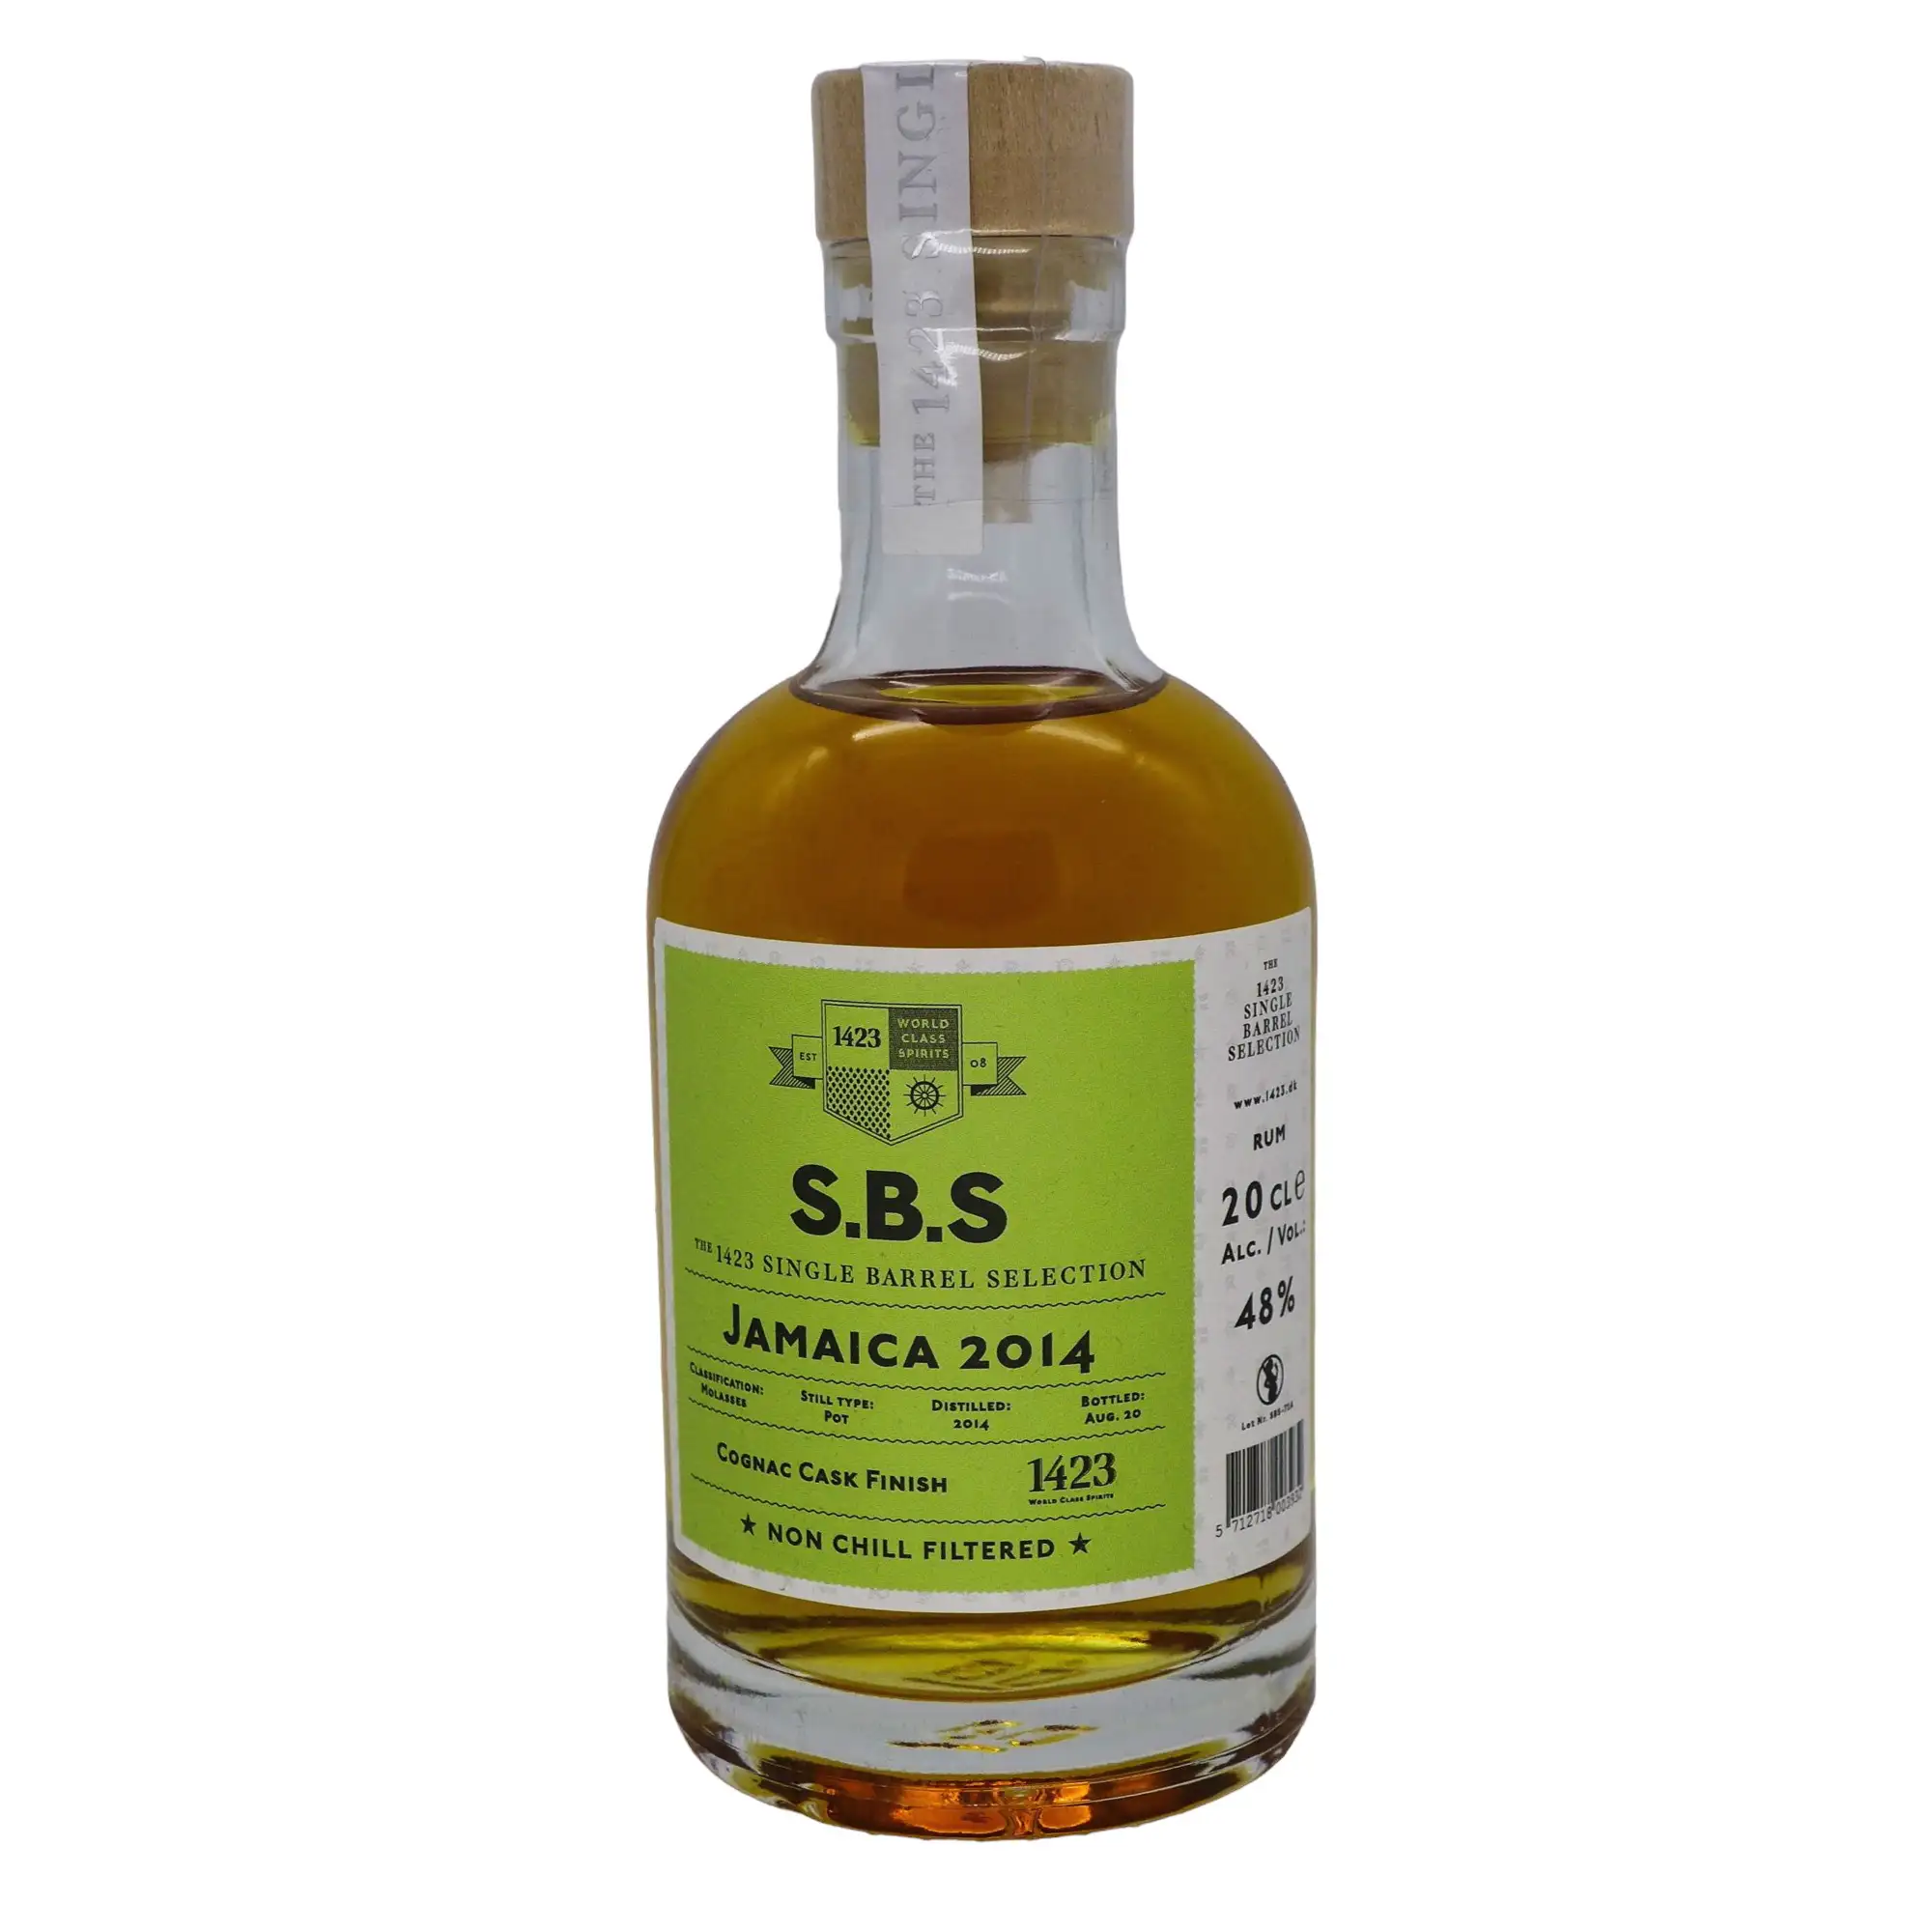 Image of the front of the bottle of the rum S.B.S Jamaica Cognac Cask Finish